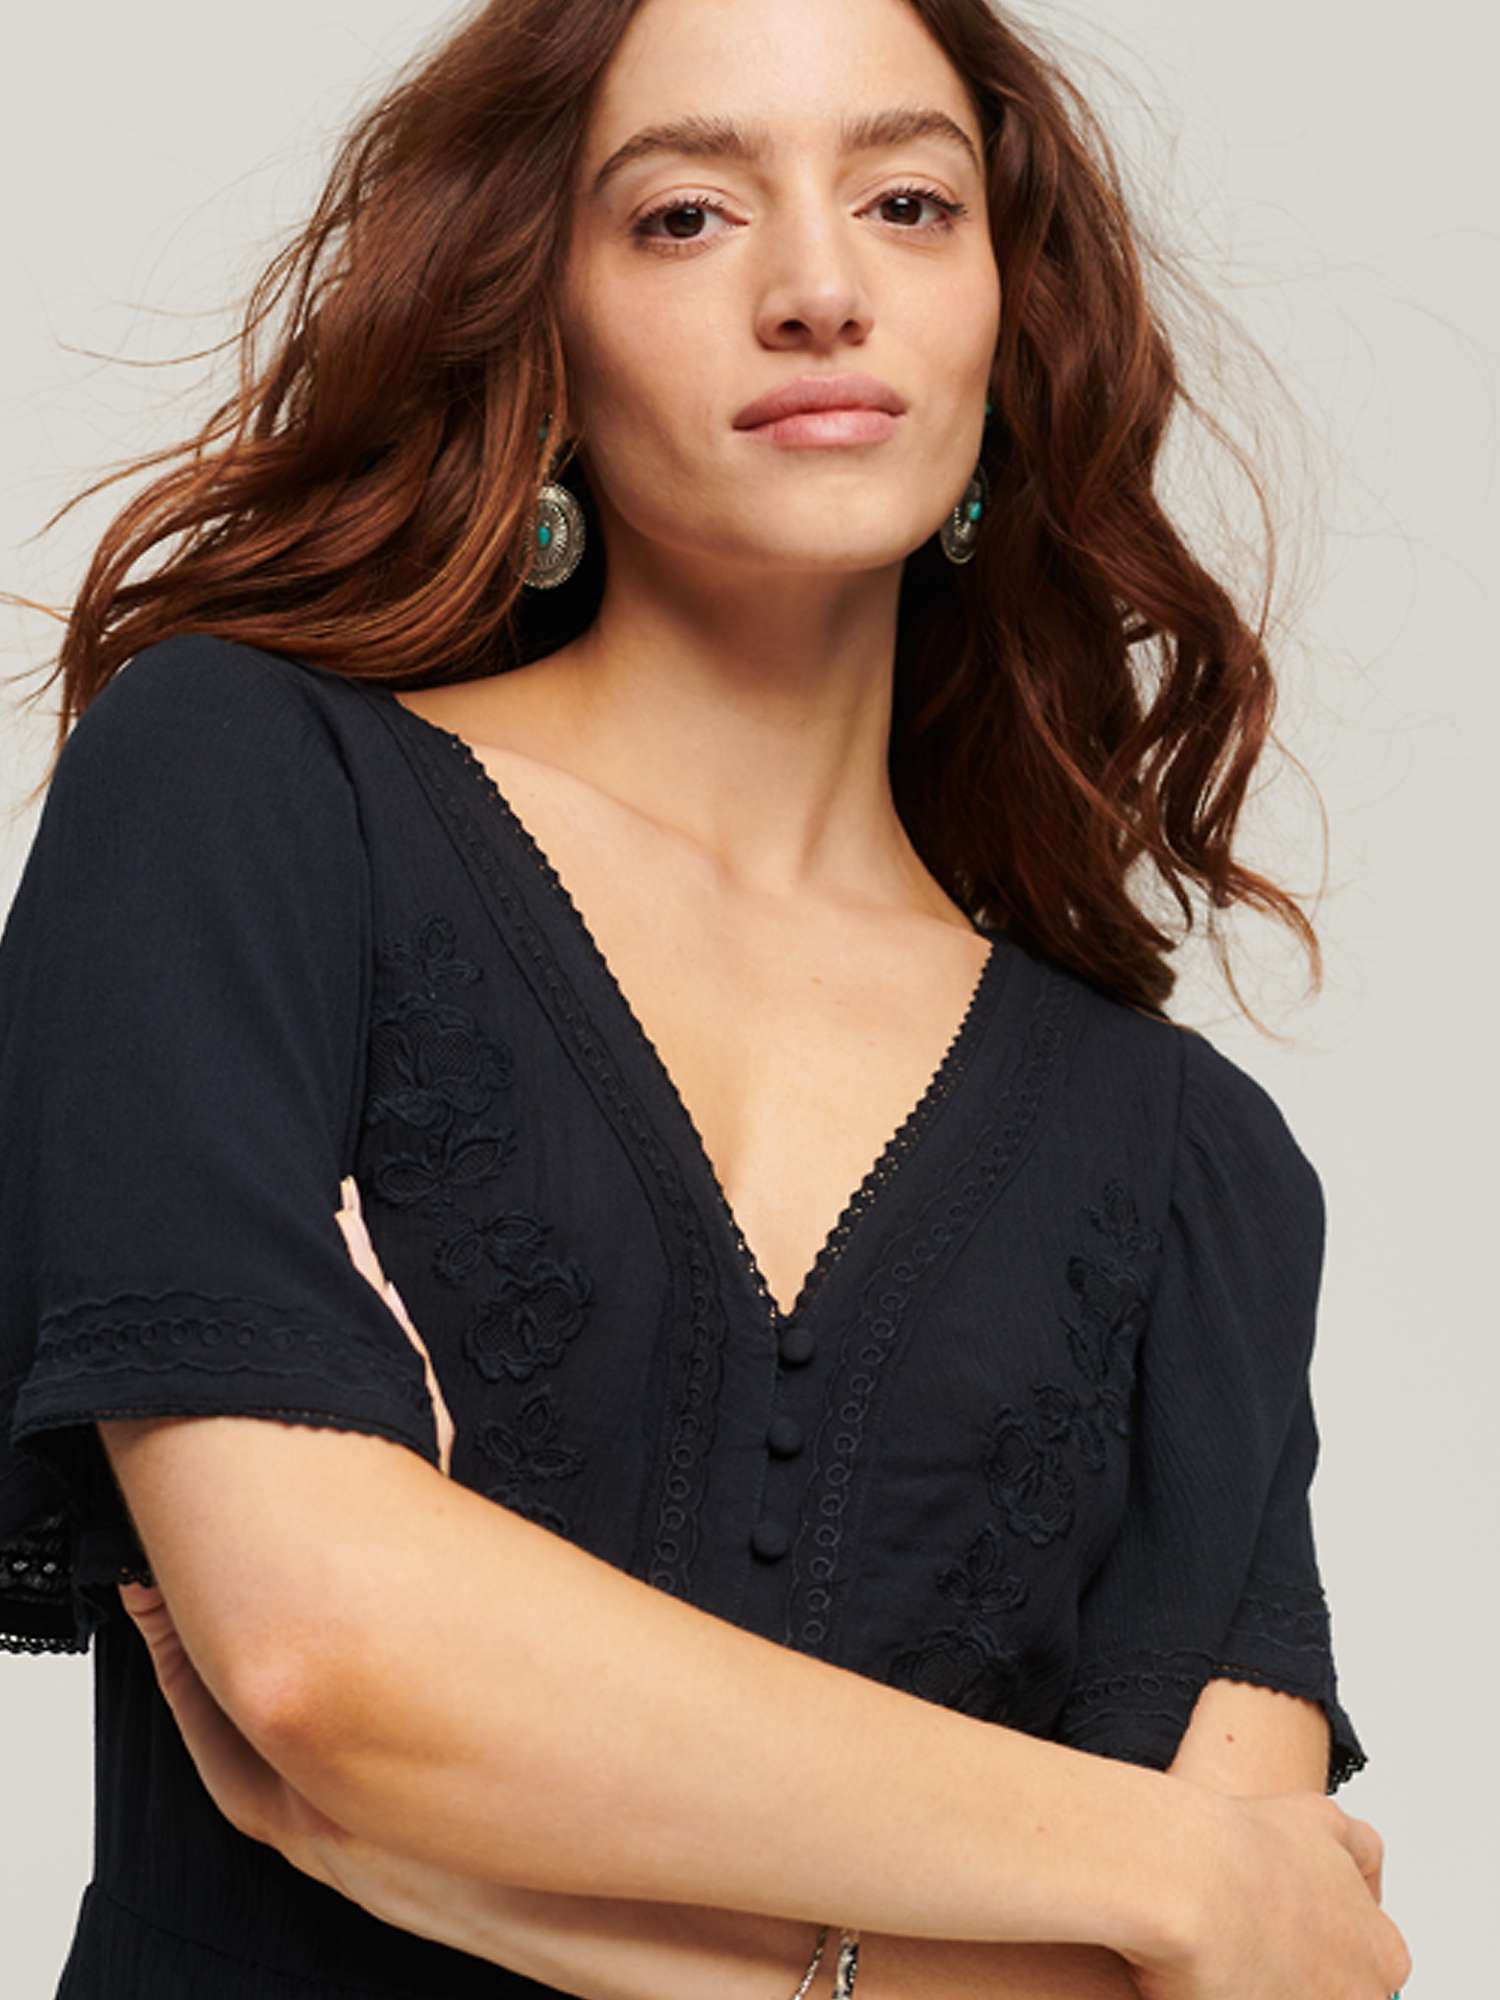 Buy Superdry Embroidered Tiered Midi Dress Online at johnlewis.com